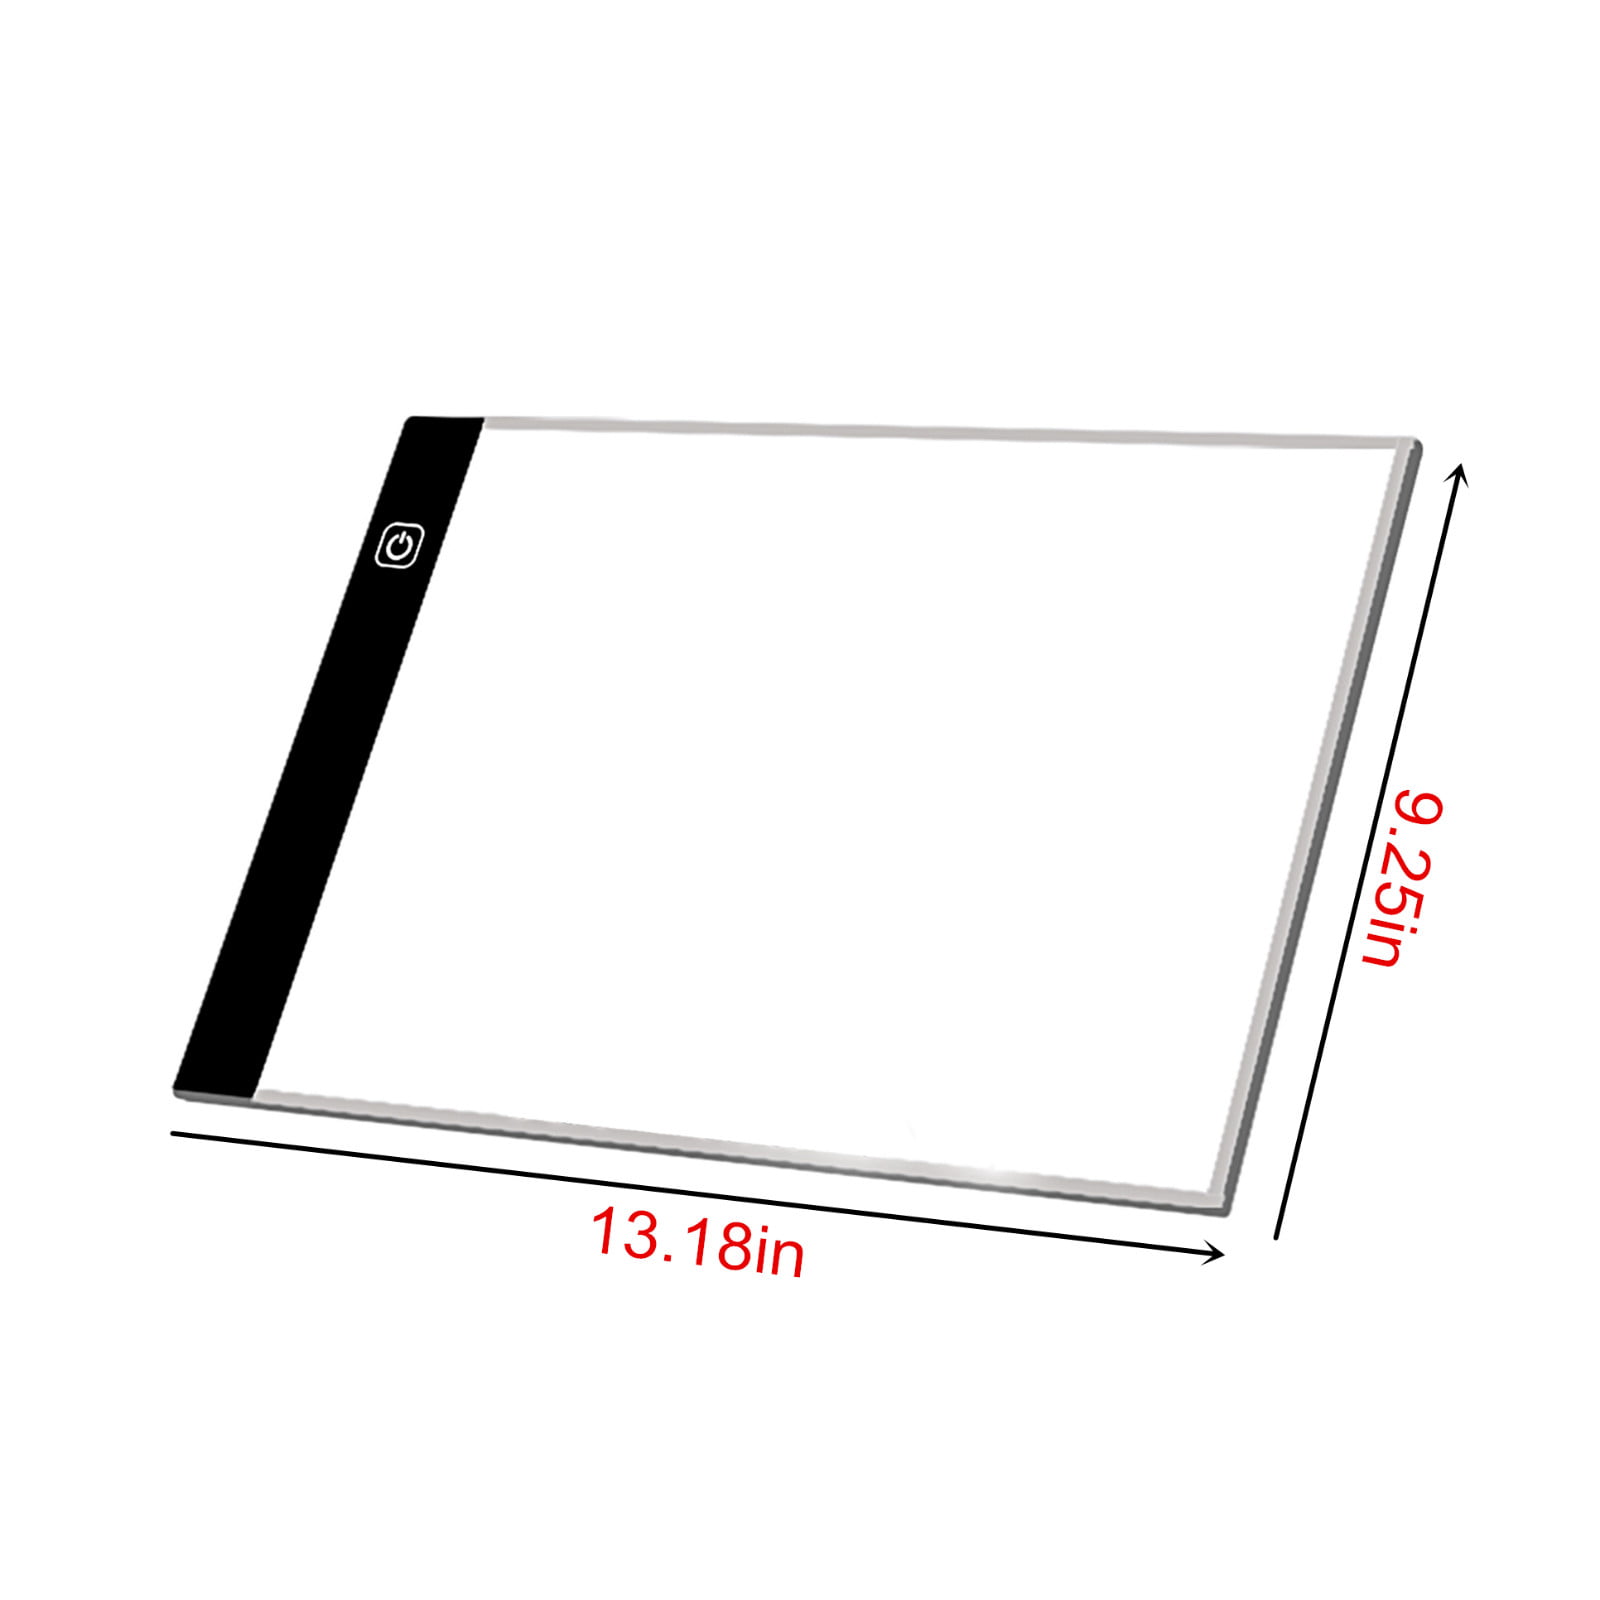 NKTIER LED Art Drawing Board, Usb Power Supply, Dimmable Tracer Light Box,  Copy Pad Platen Mold, Used for Streaming Media, Sketching, Animation,  Decoration 